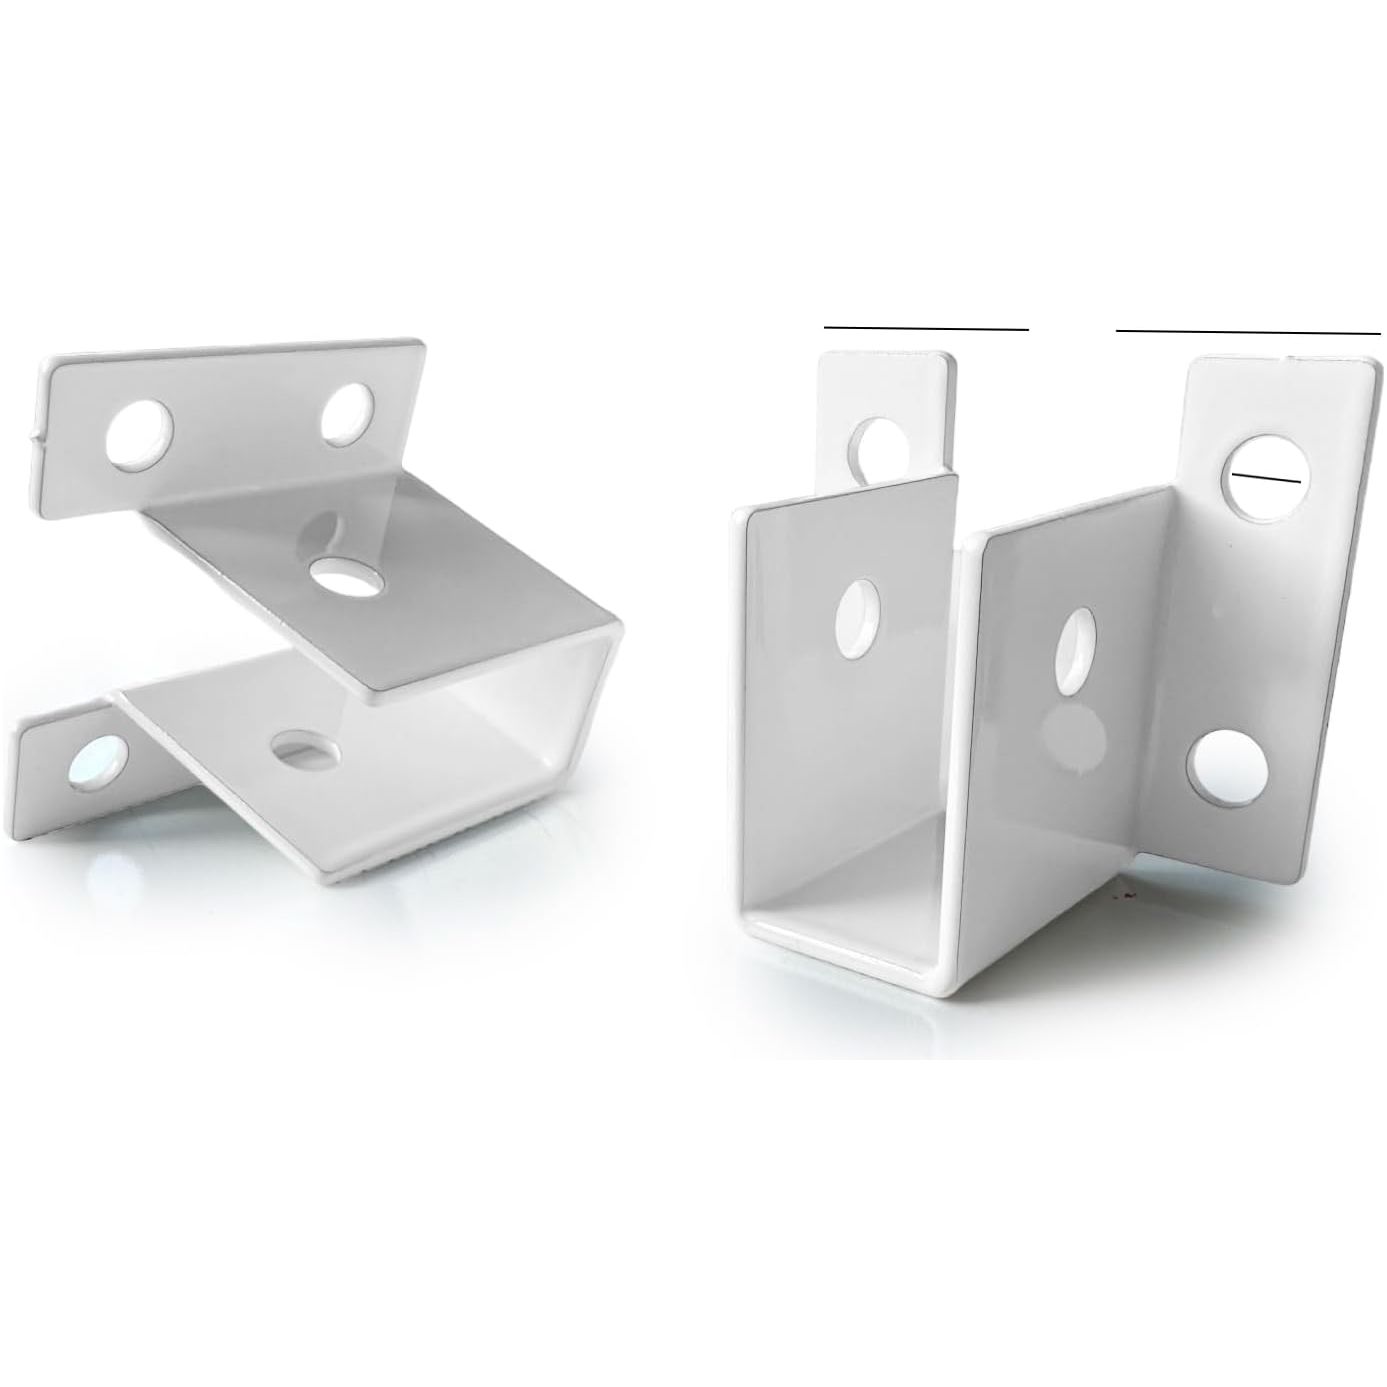 2-Pack, 3/4" Versatile U-Bracket Set, Mount Larger Substrates & Panels, White Powder Coated Steel, Ideal for Wider Applications, Mounting Screws not Included (1/2" - 14/16" Width, 2-Pack)